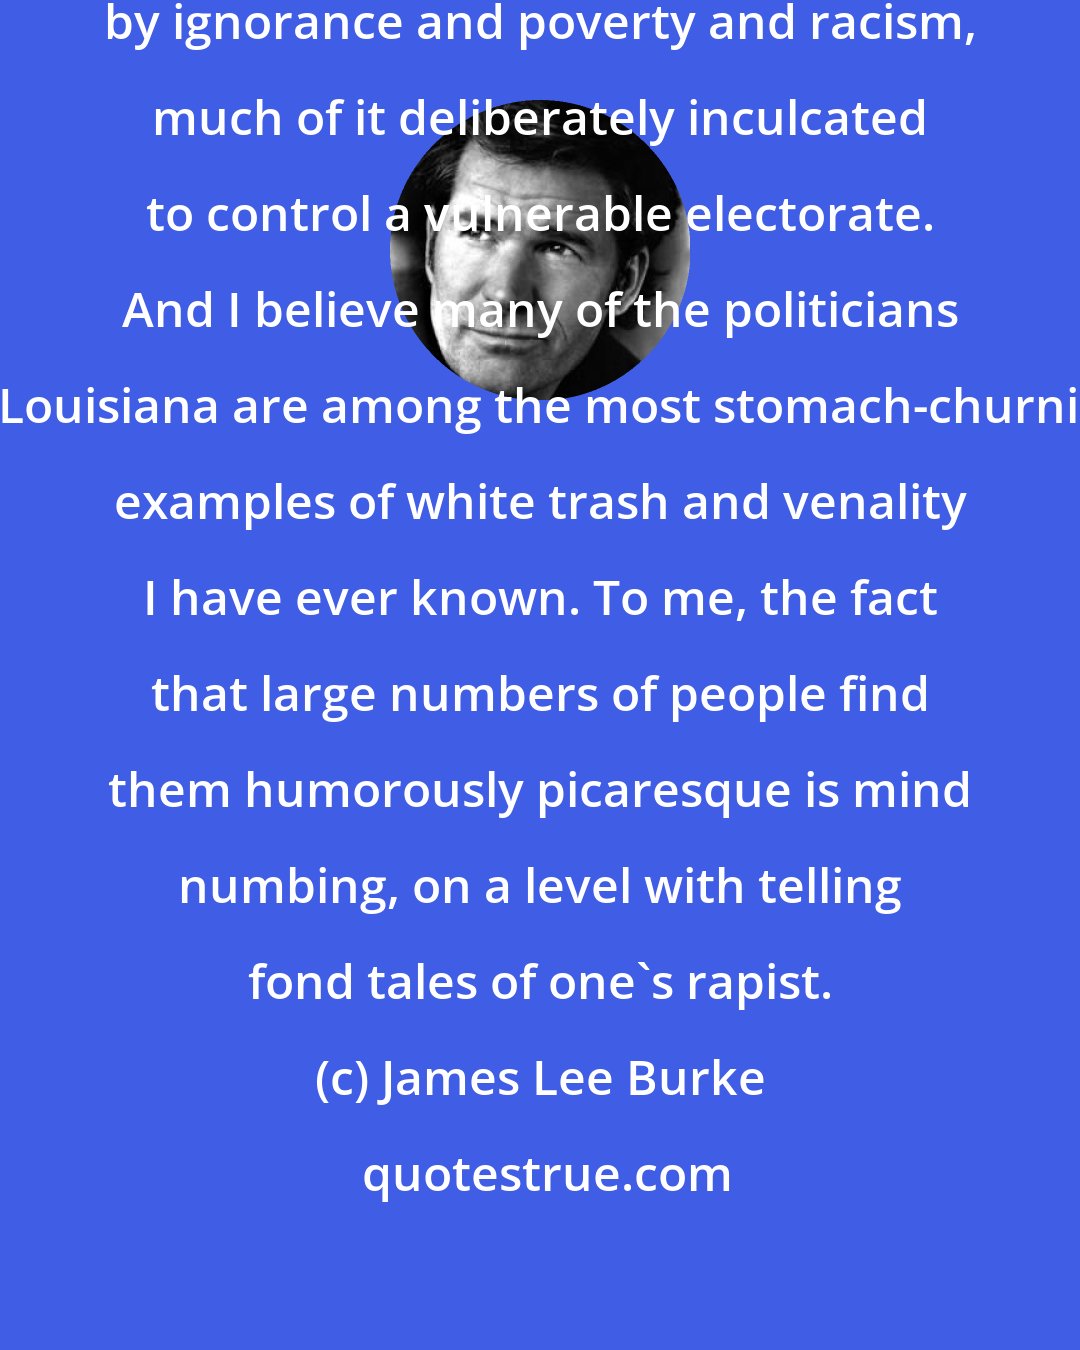 James Lee Burke: I also believe my home state is cursed by ignorance and poverty and racism, much of it deliberately inculcated to control a vulnerable electorate. And I believe many of the politicians in Louisiana are among the most stomach-churning examples of white trash and venality I have ever known. To me, the fact that large numbers of people find them humorously picaresque is mind numbing, on a level with telling fond tales of one's rapist.